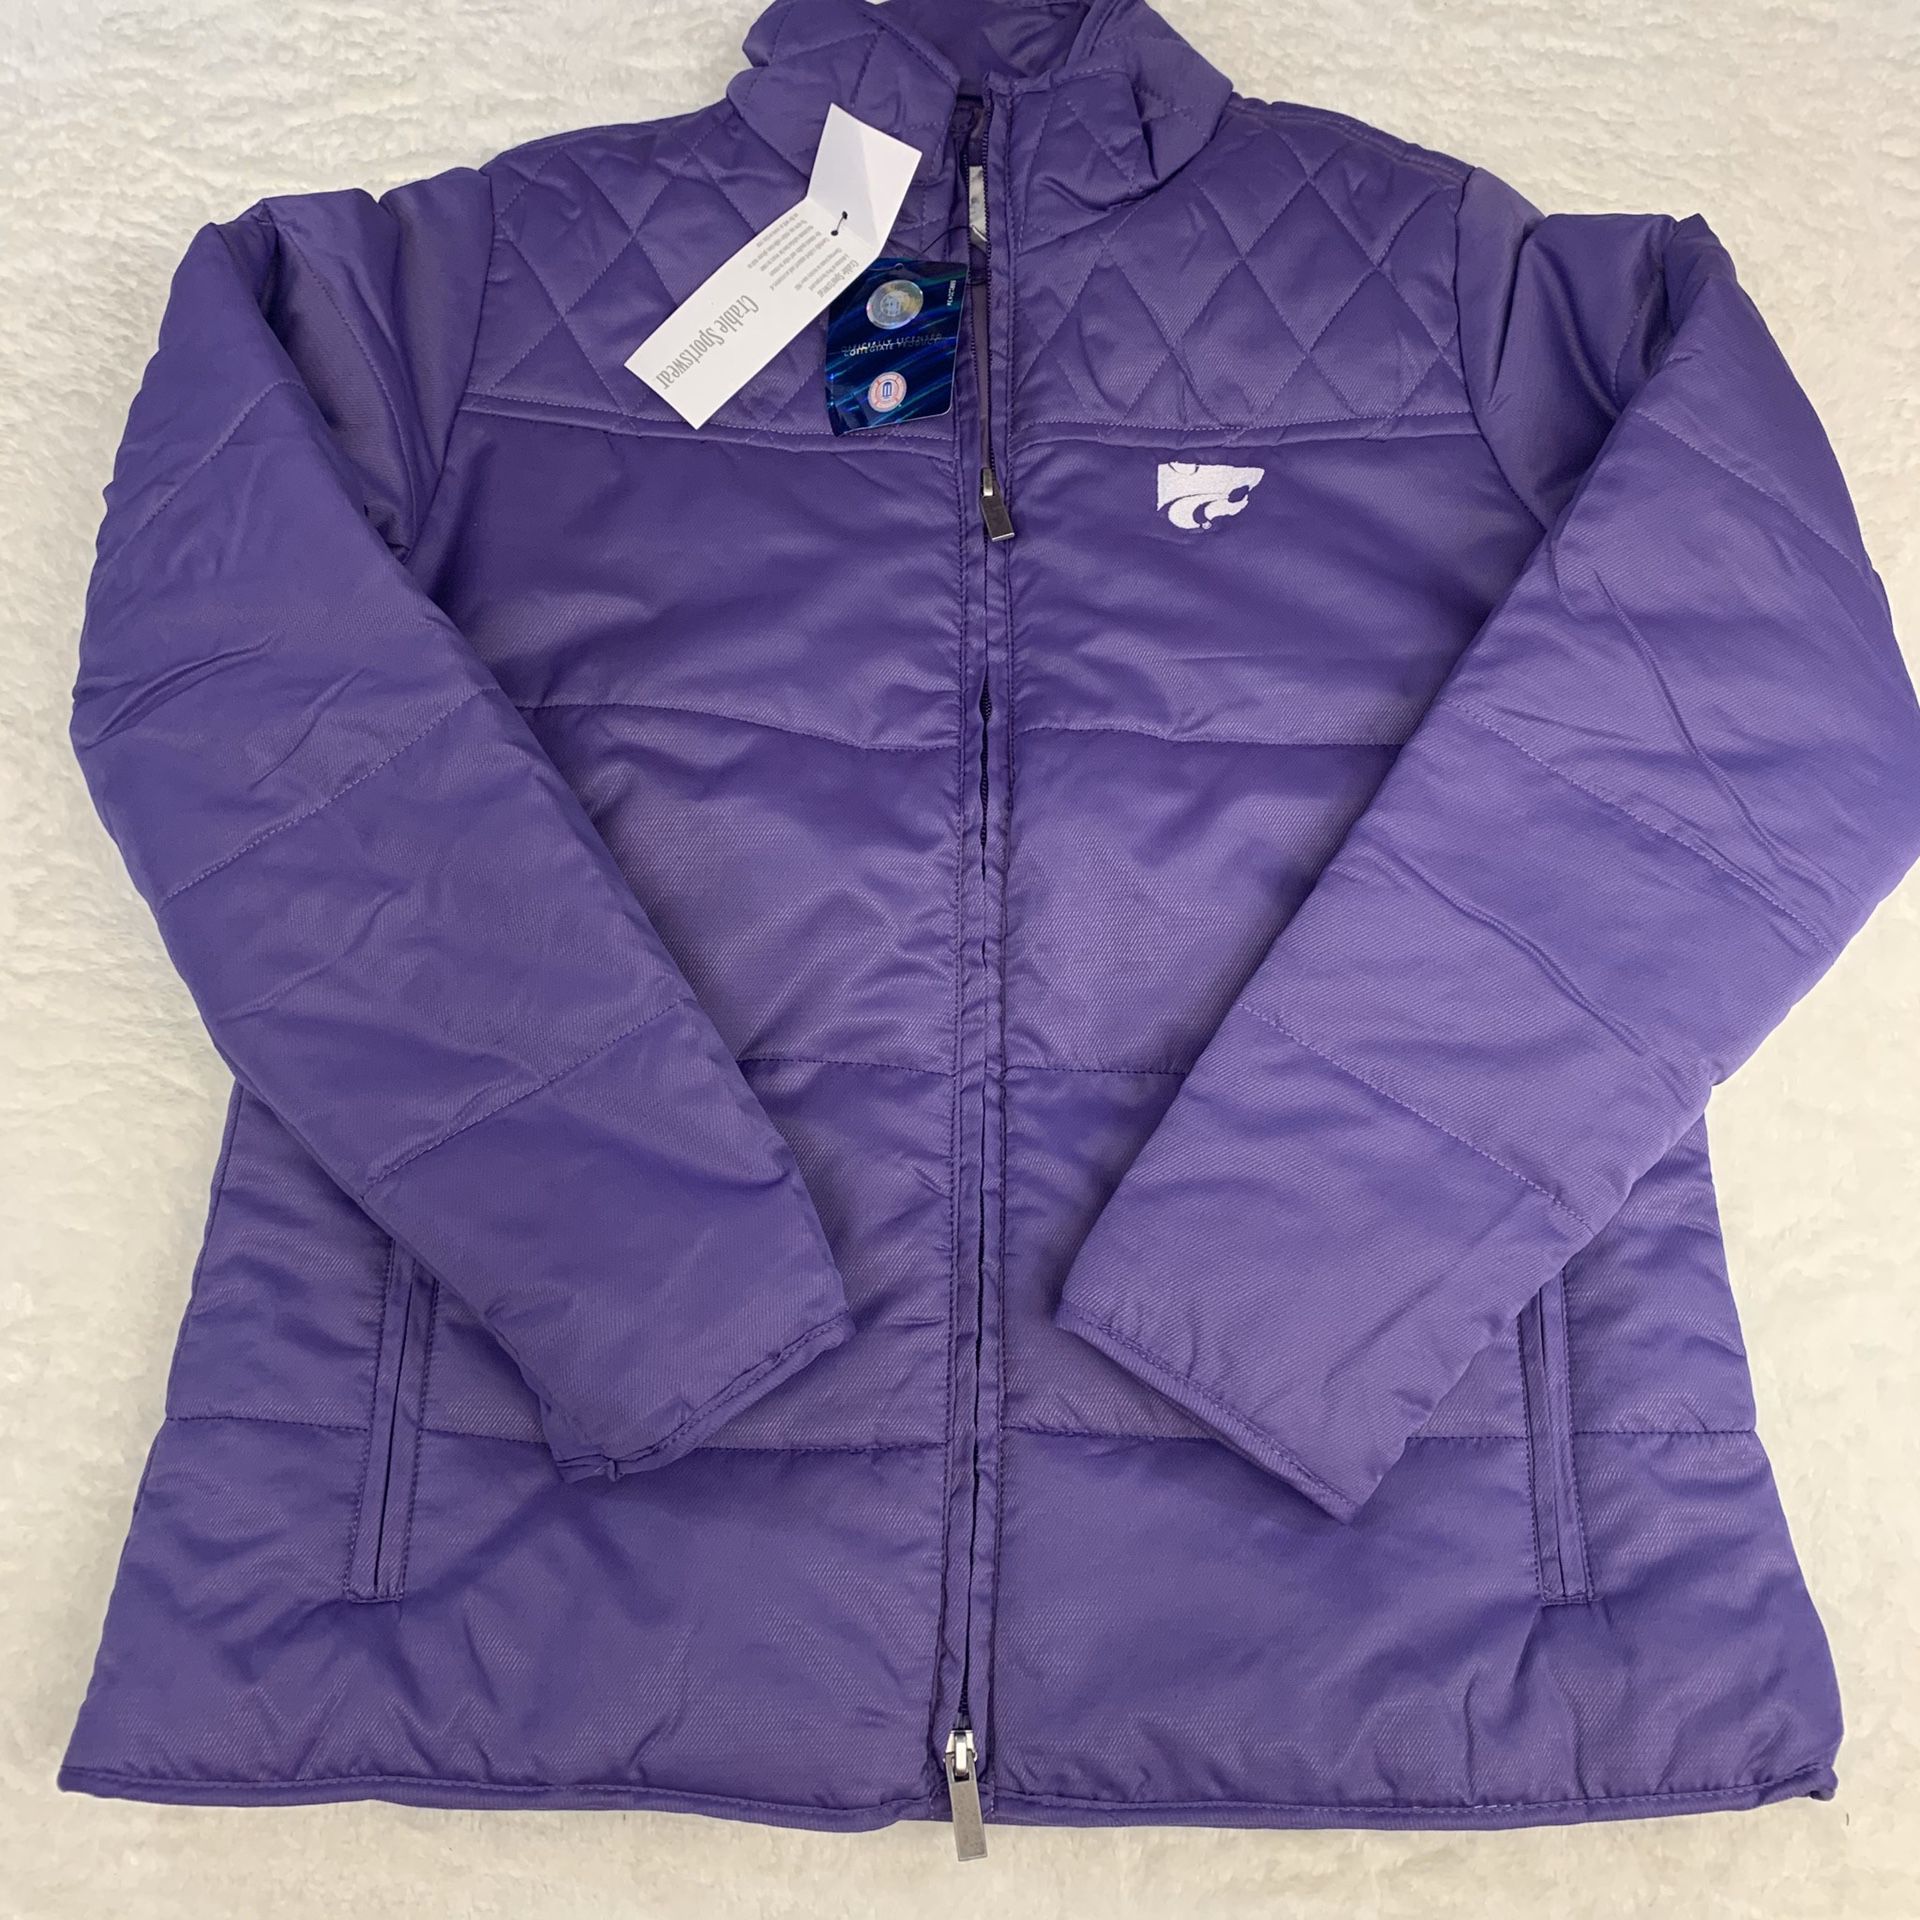 NEW Kansas State Jackets! Women’s XL available!